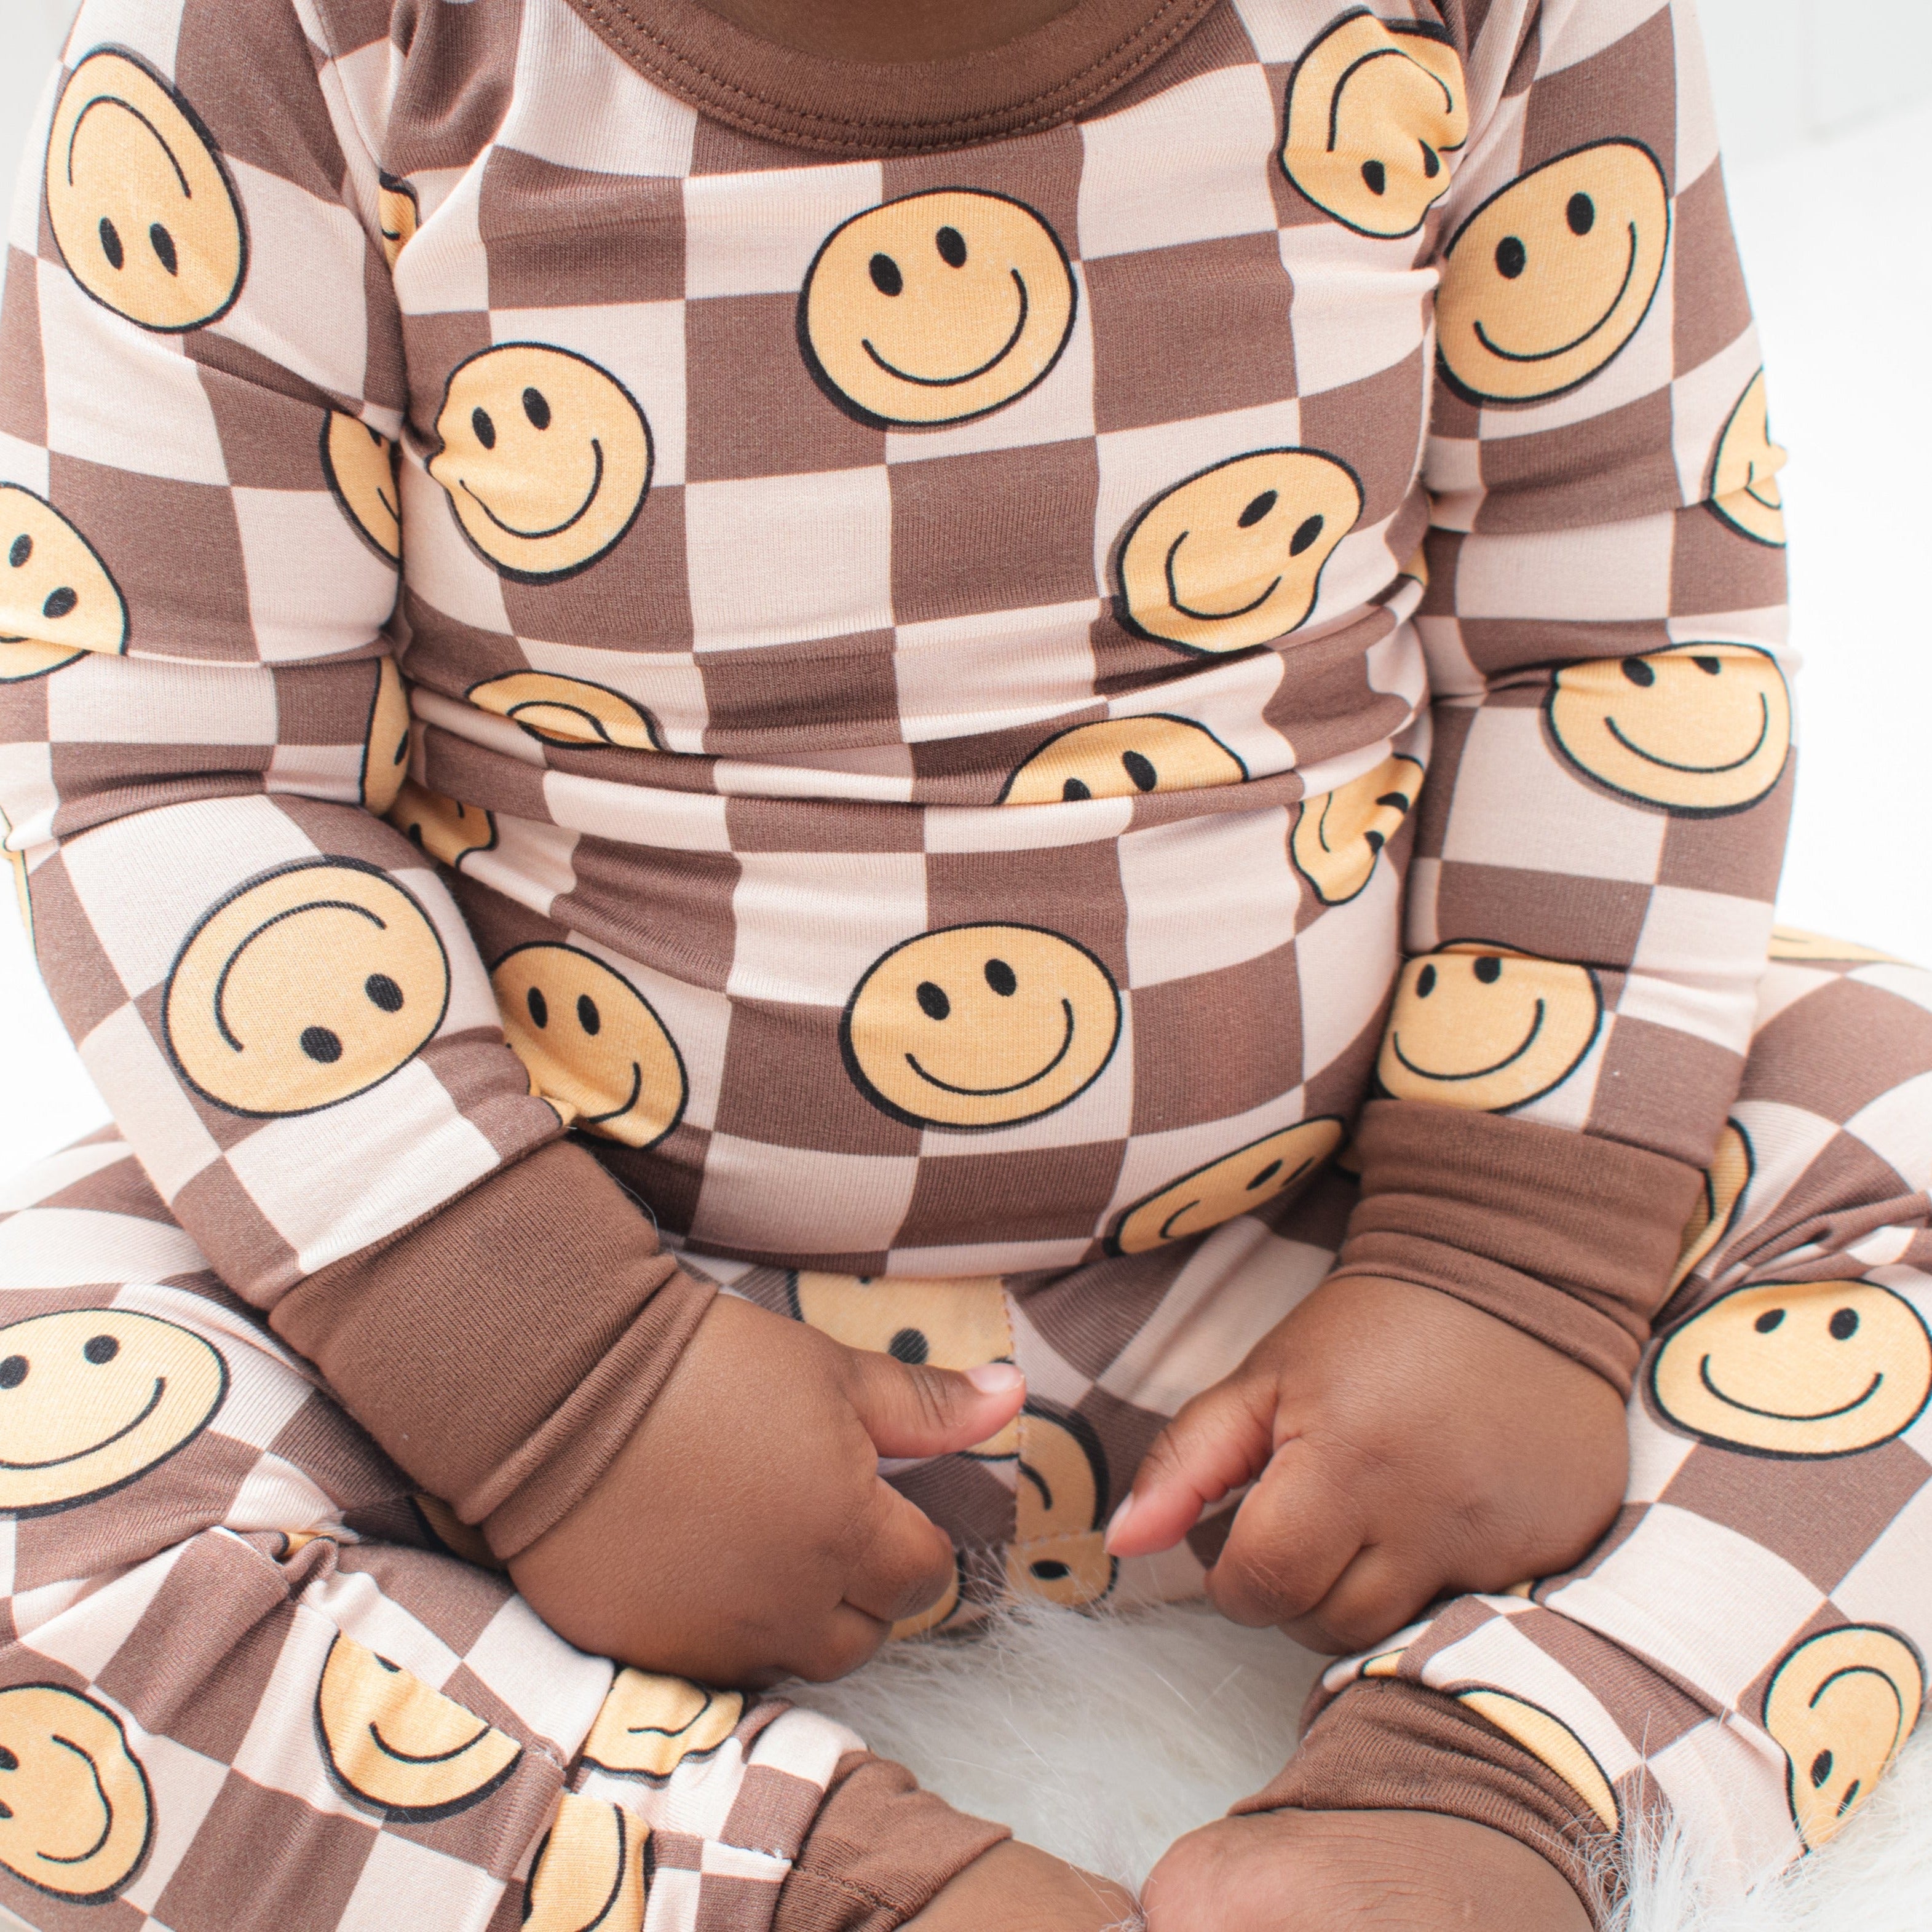 Long Sleeve 2 Piece Sets, Neutral Smiles